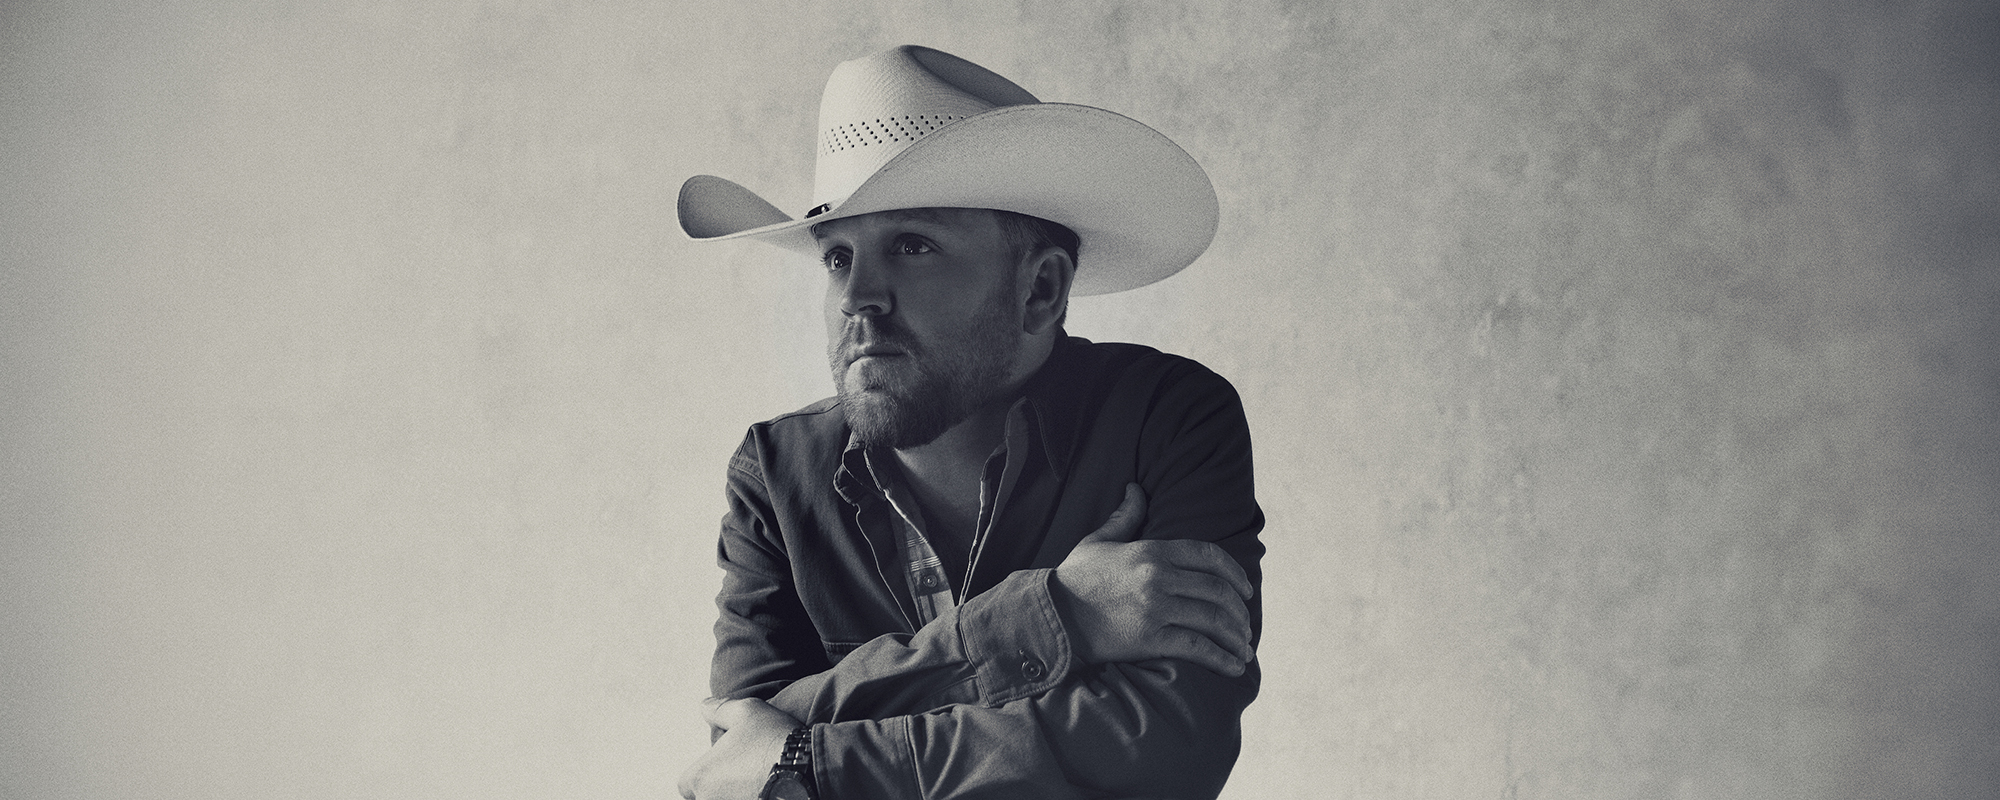 Justin Moore on ‘Stray Dog,’ Songwriting and Doing Things His Own Way